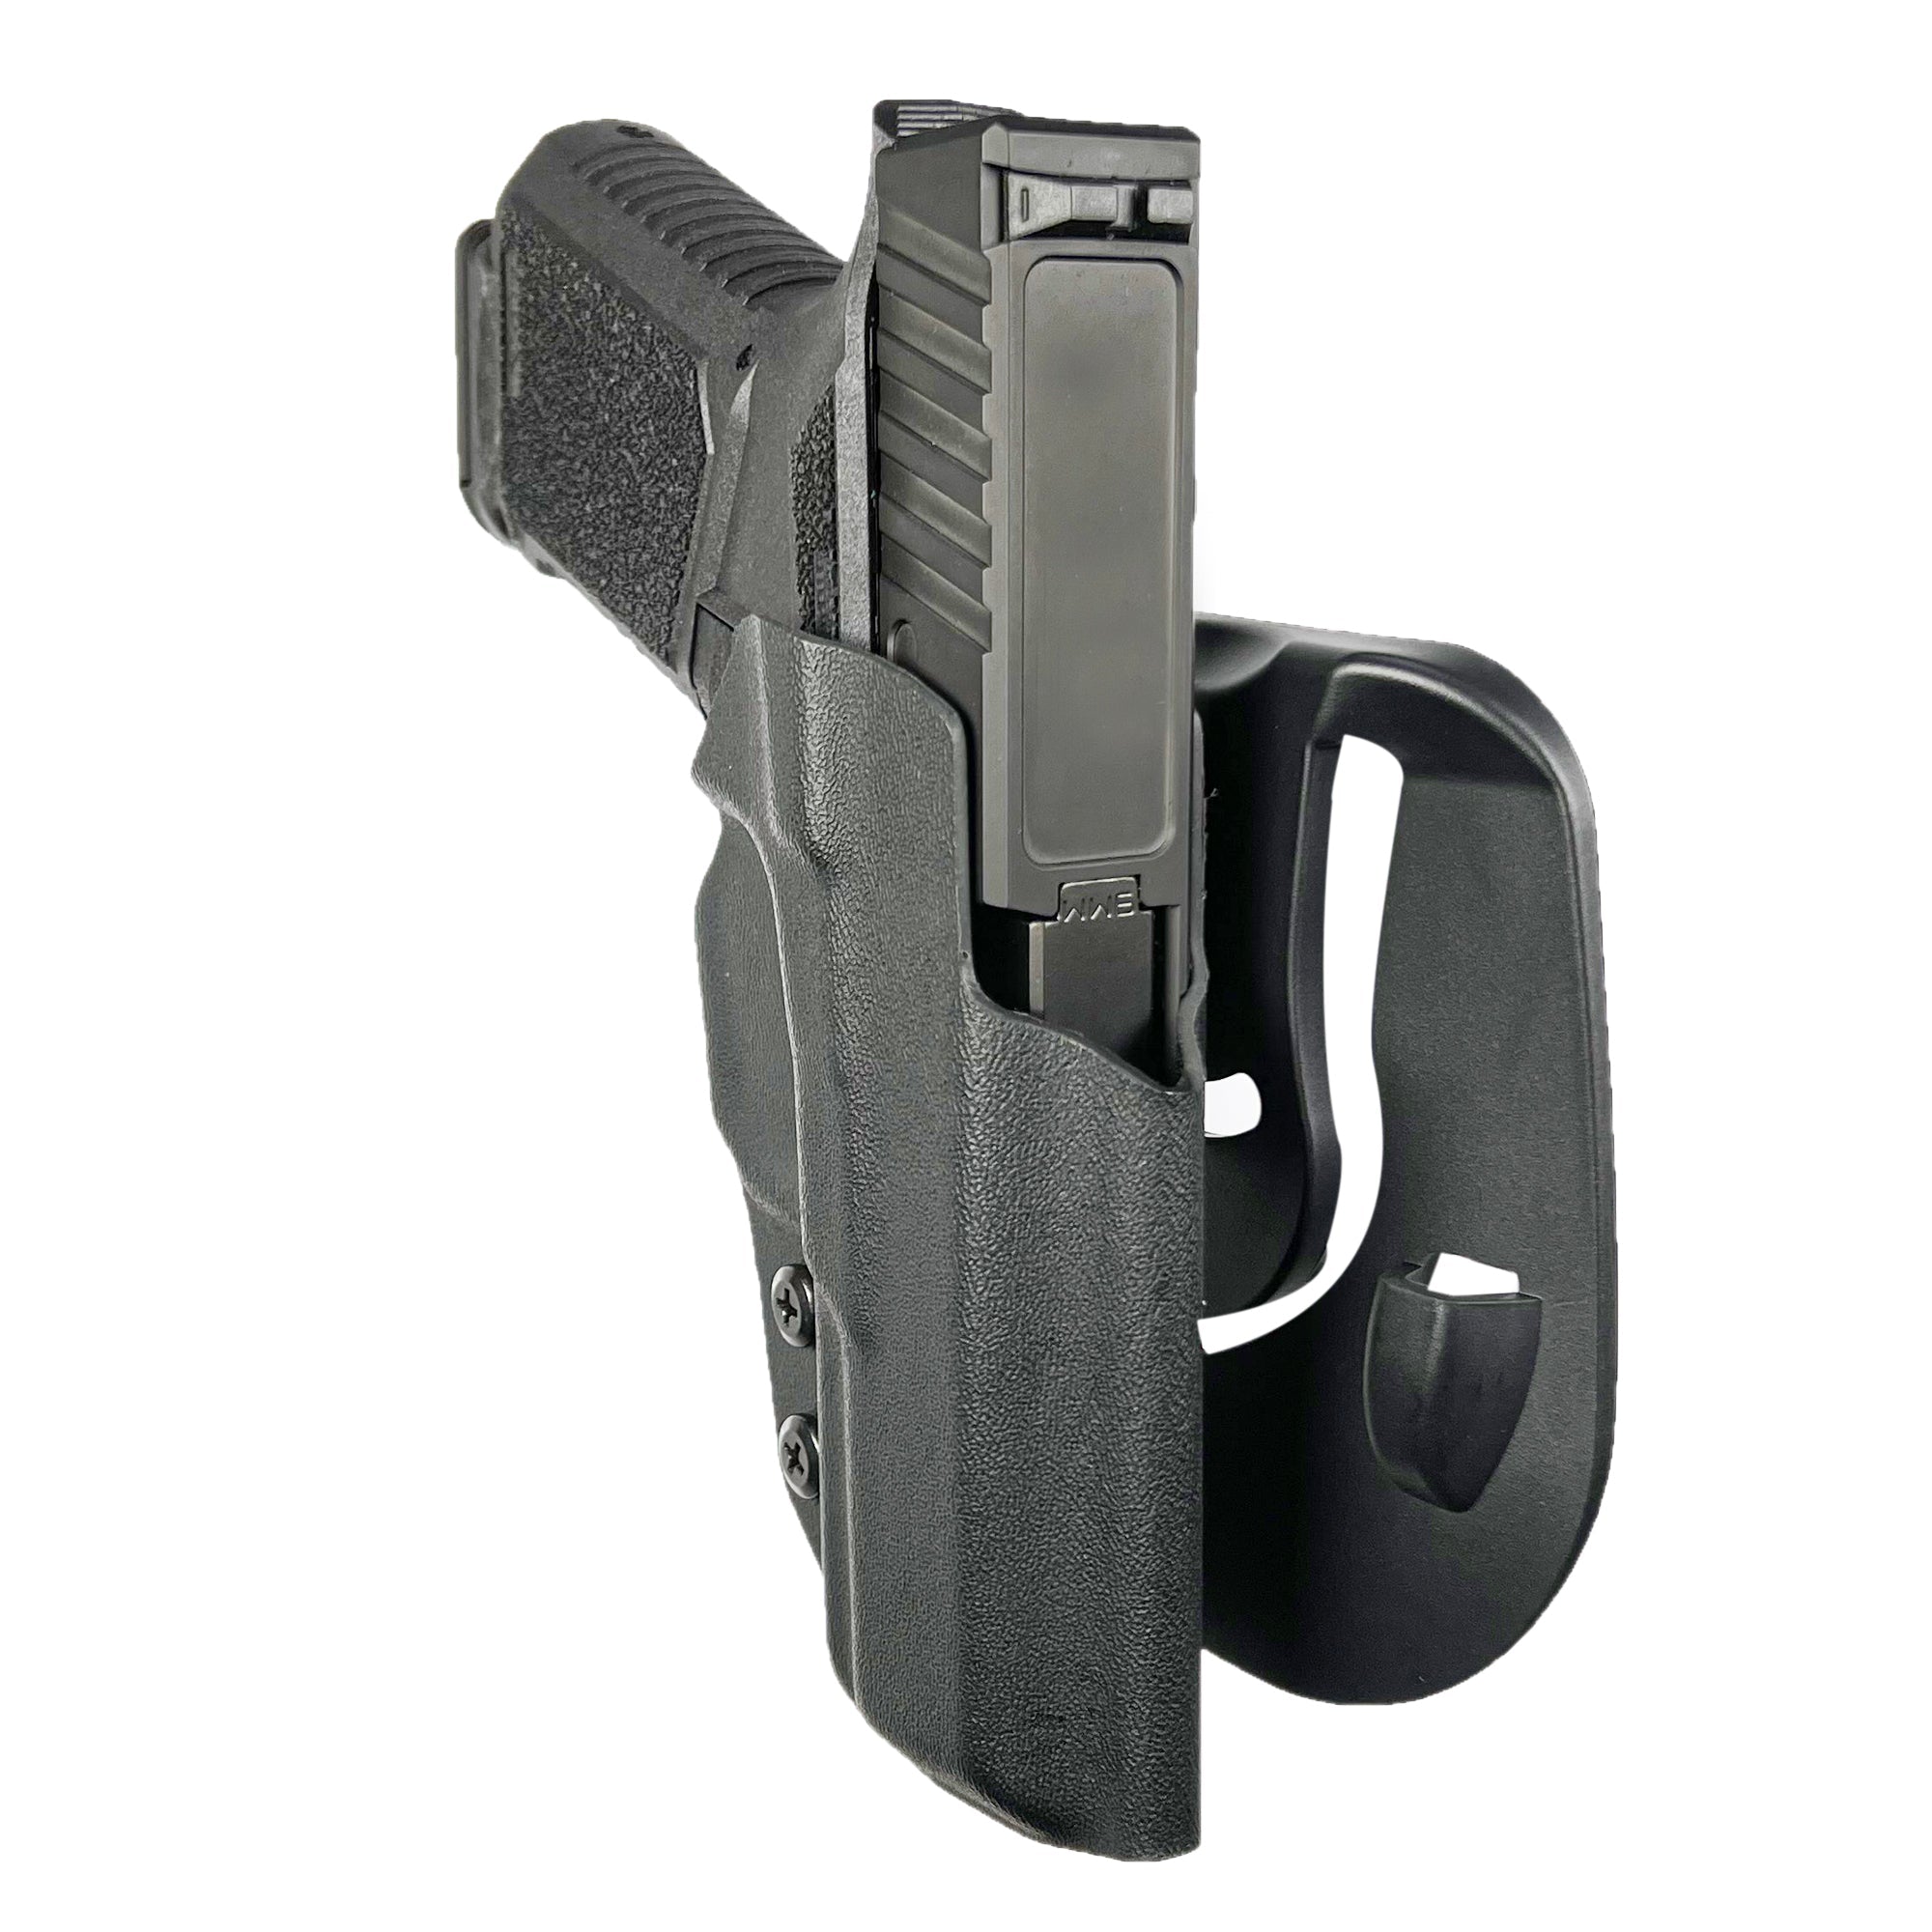 Anderson Manufacturing Kiger 9C OWB Paddle Holster